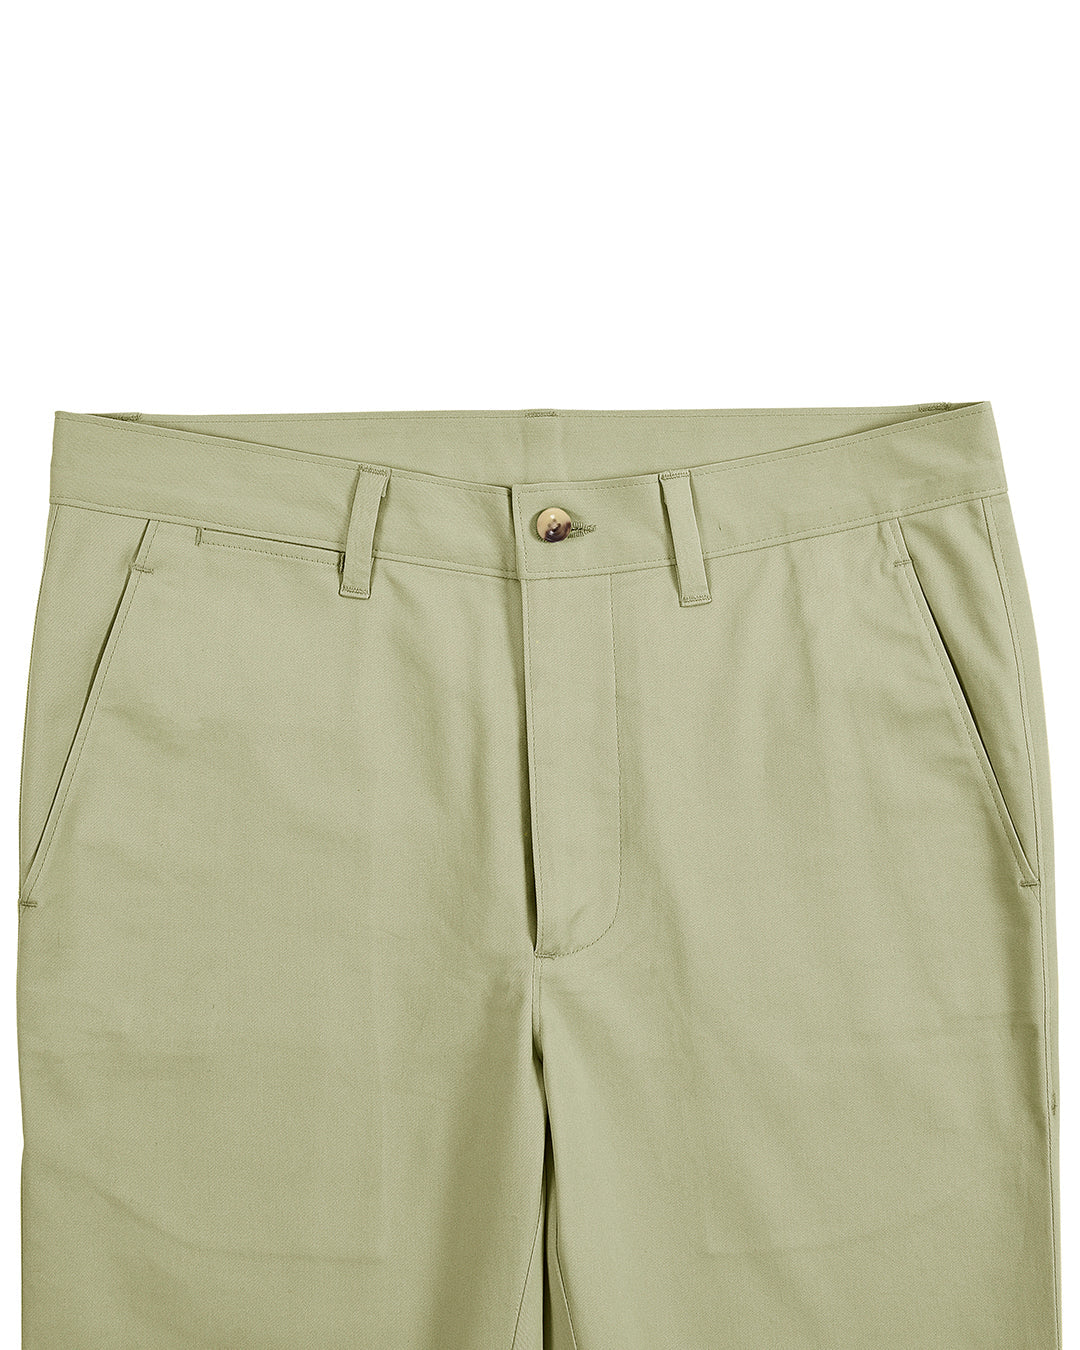 Front view of custom Genoa Chino pants for men by Luxire in pale lime